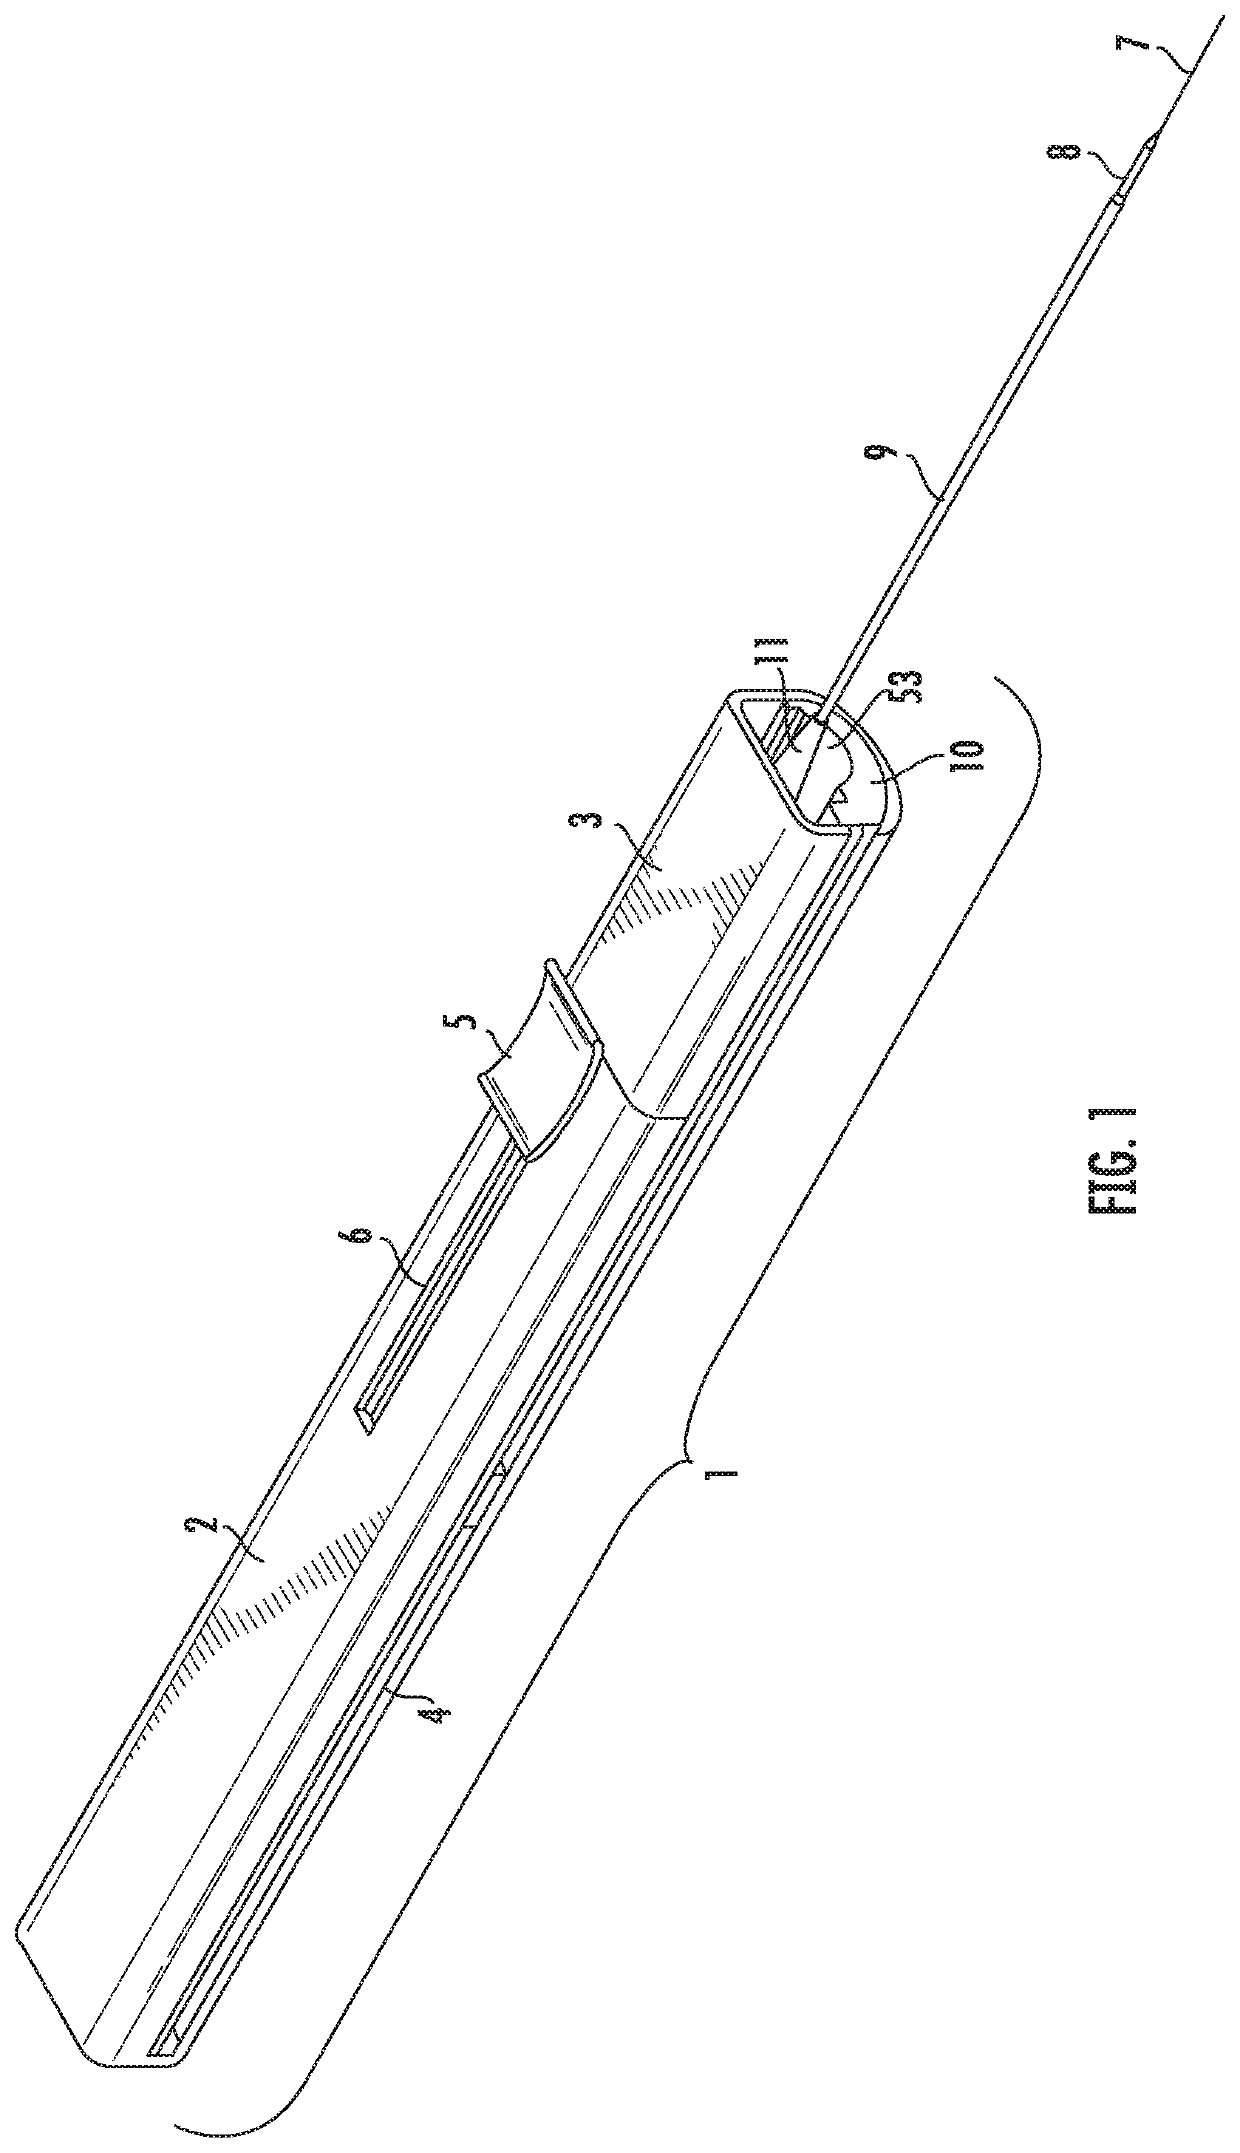 Safety device for retraction of a needle and guidewire for medical procedures and method of use